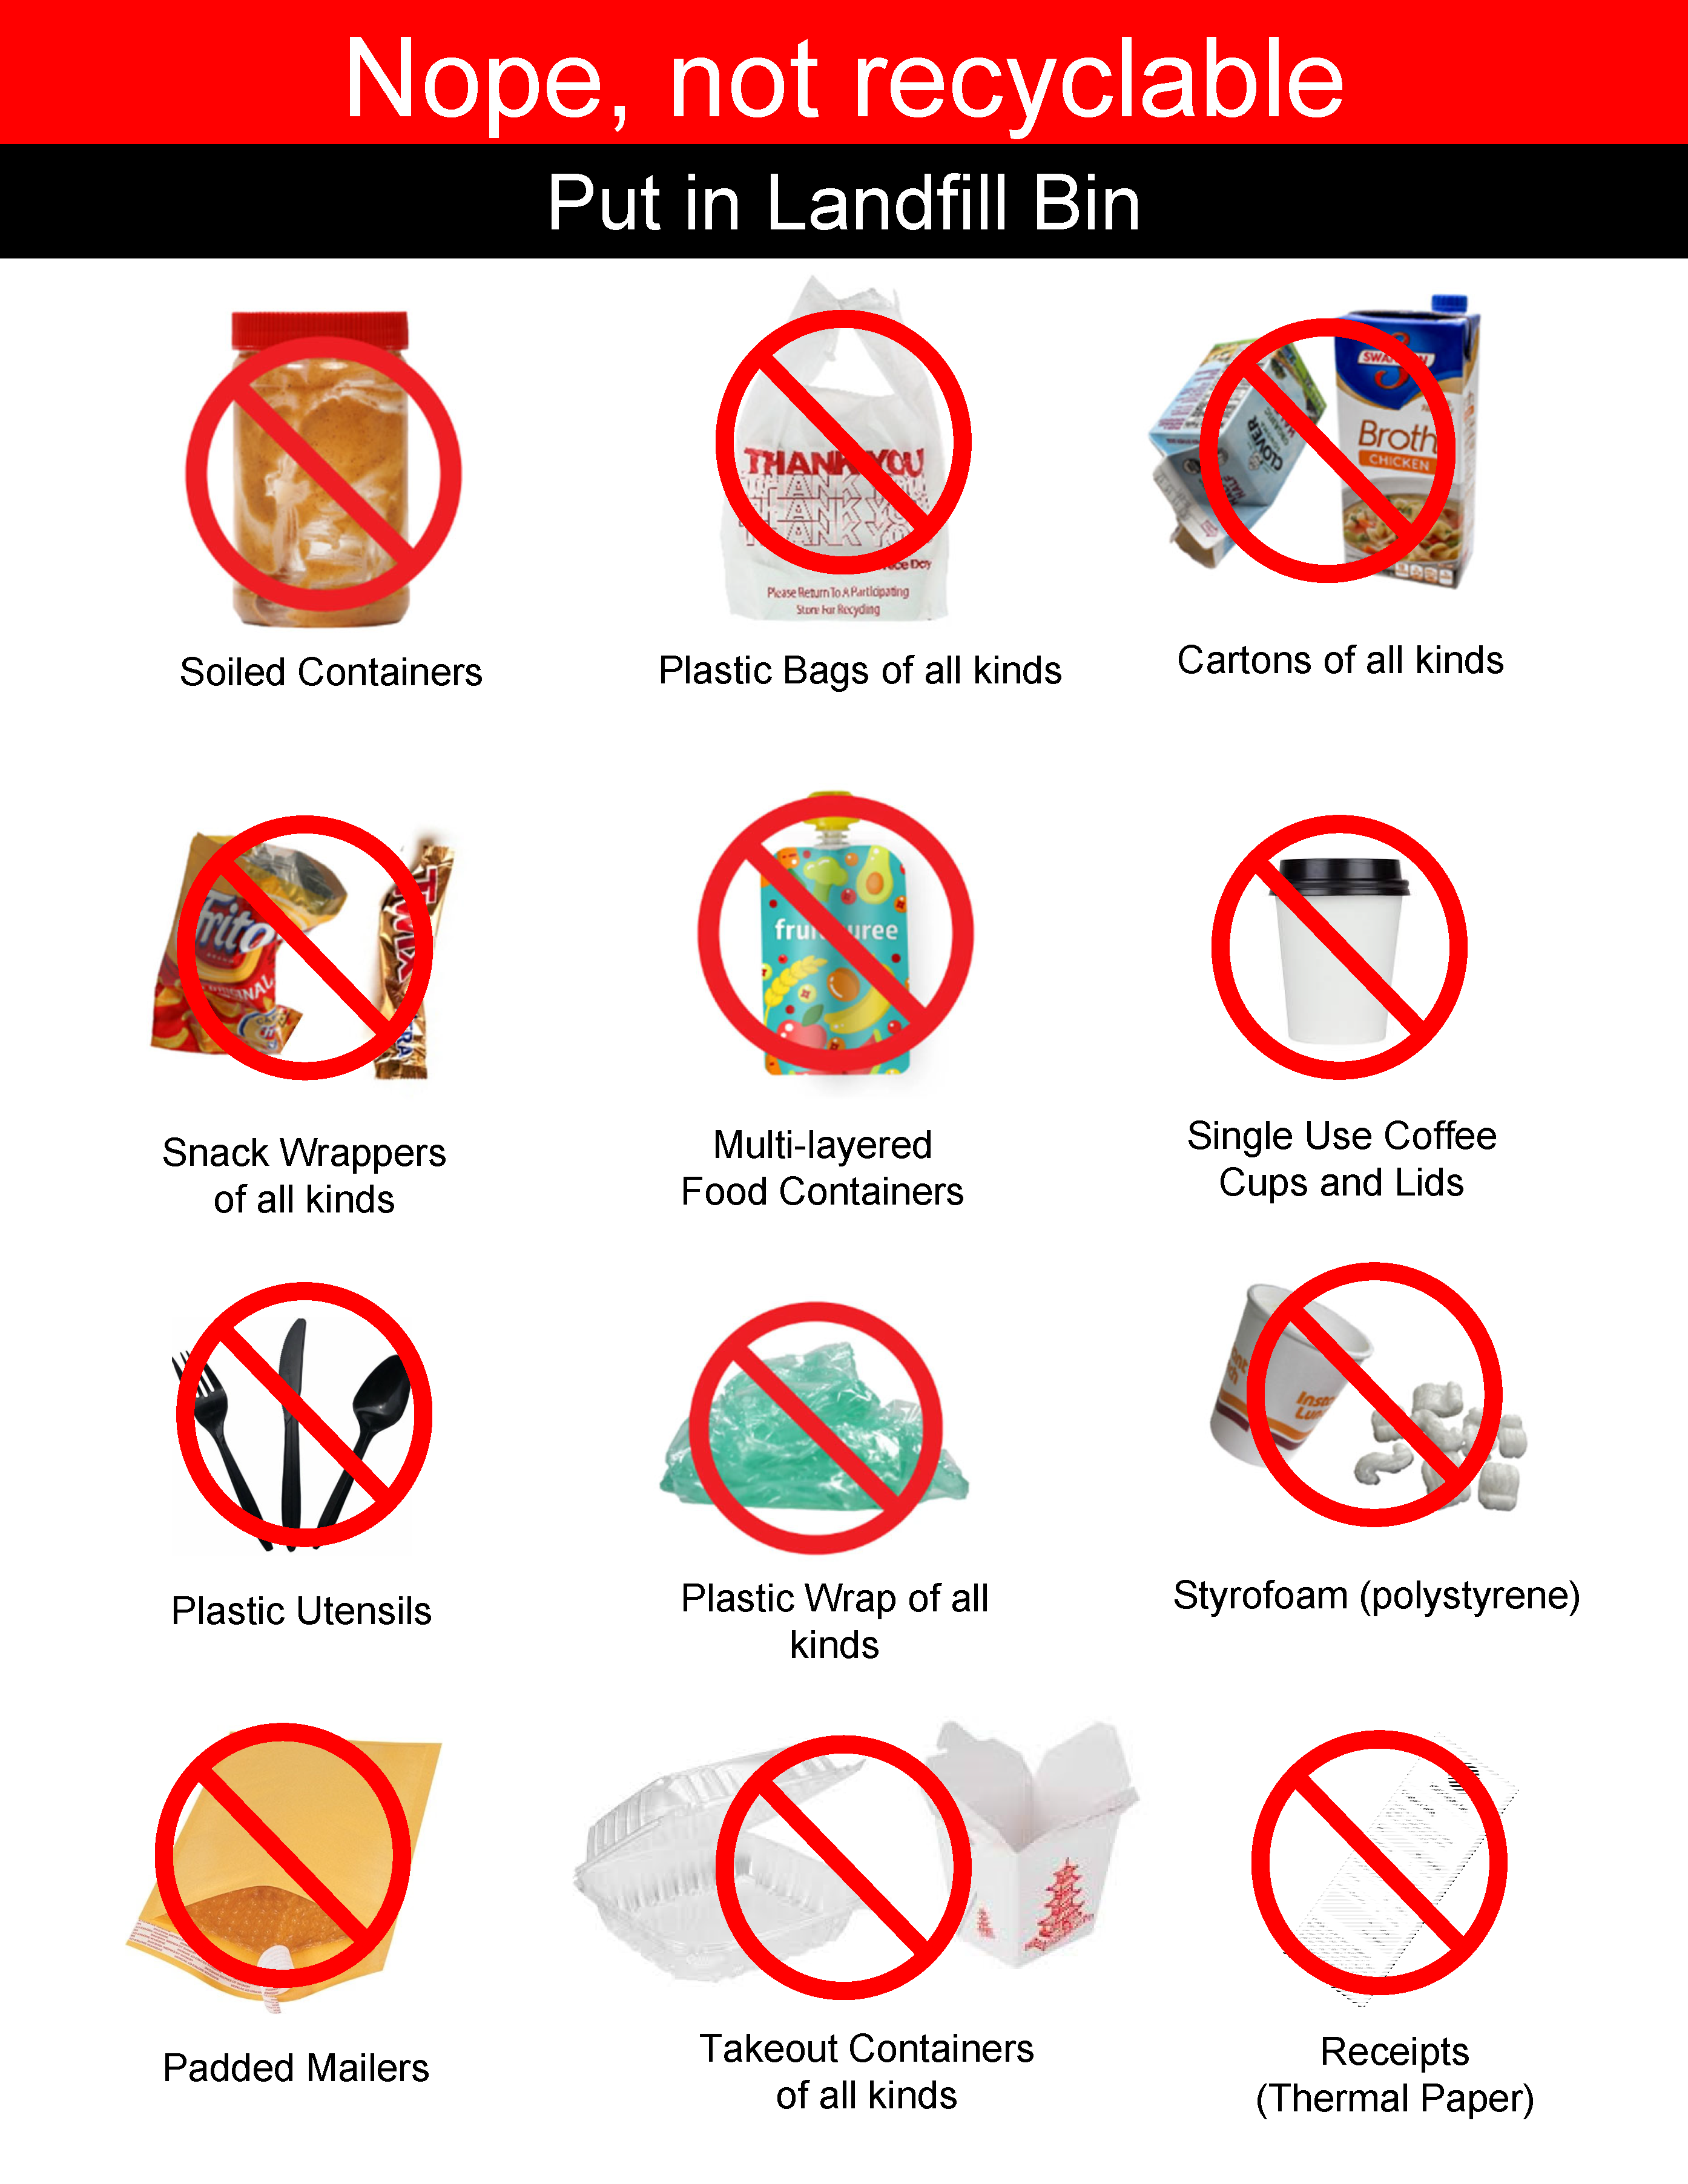 List of items that should not be thrown into the mixed recycling bins on campus